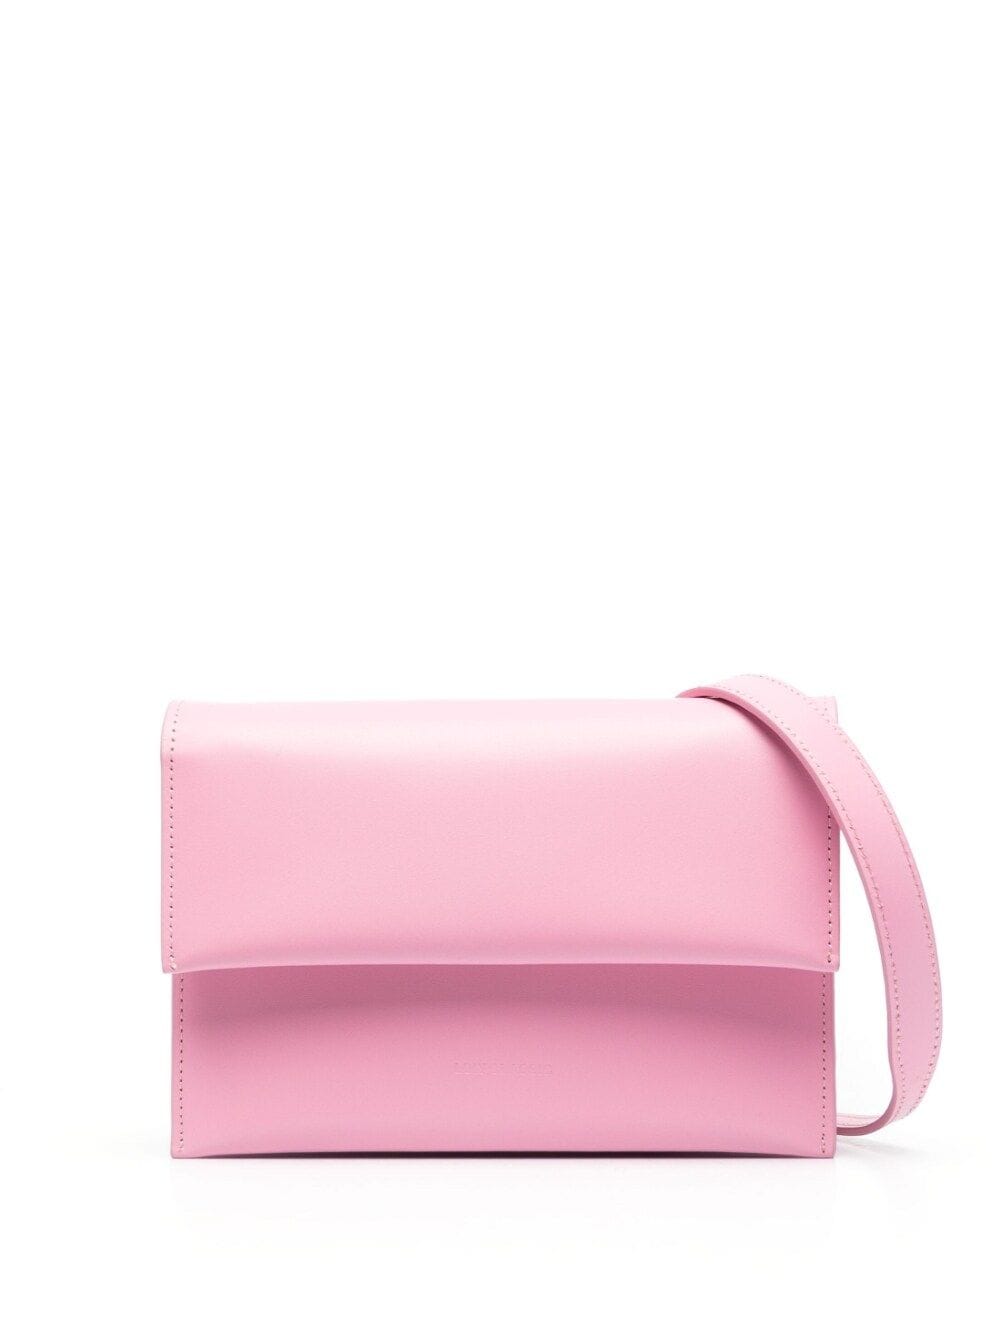 Low Classic Foldover Top Leather Bag In Pink